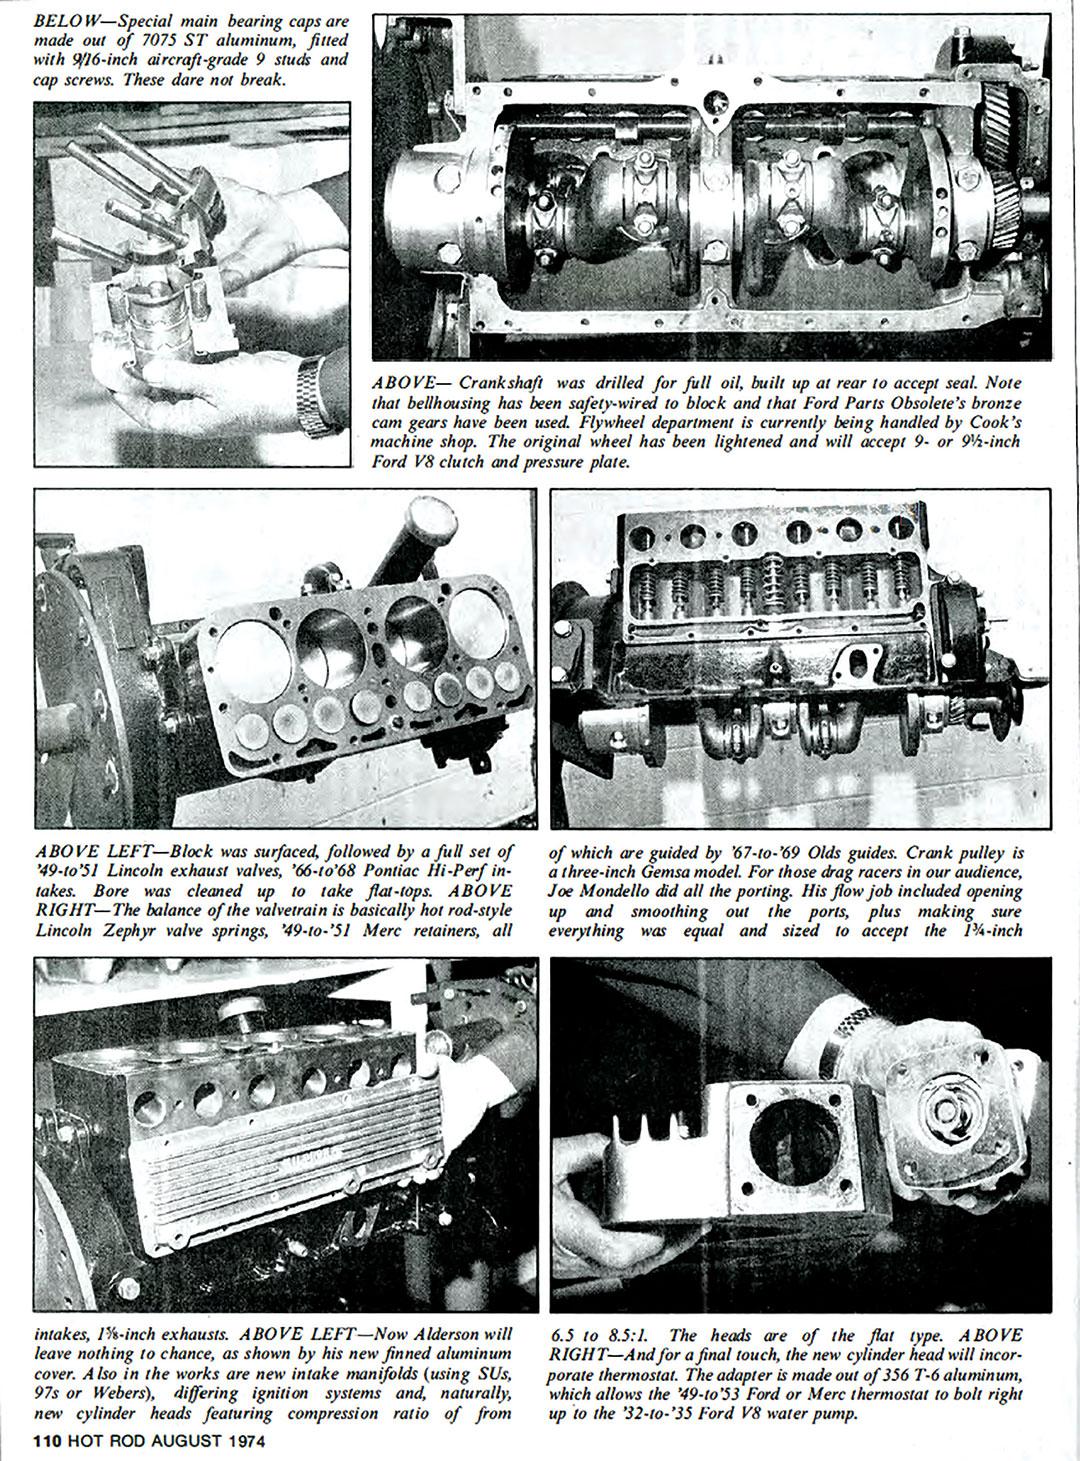 Racing Engine. This 1 of 1 Ford Model B has a story. Built by Don Alderson